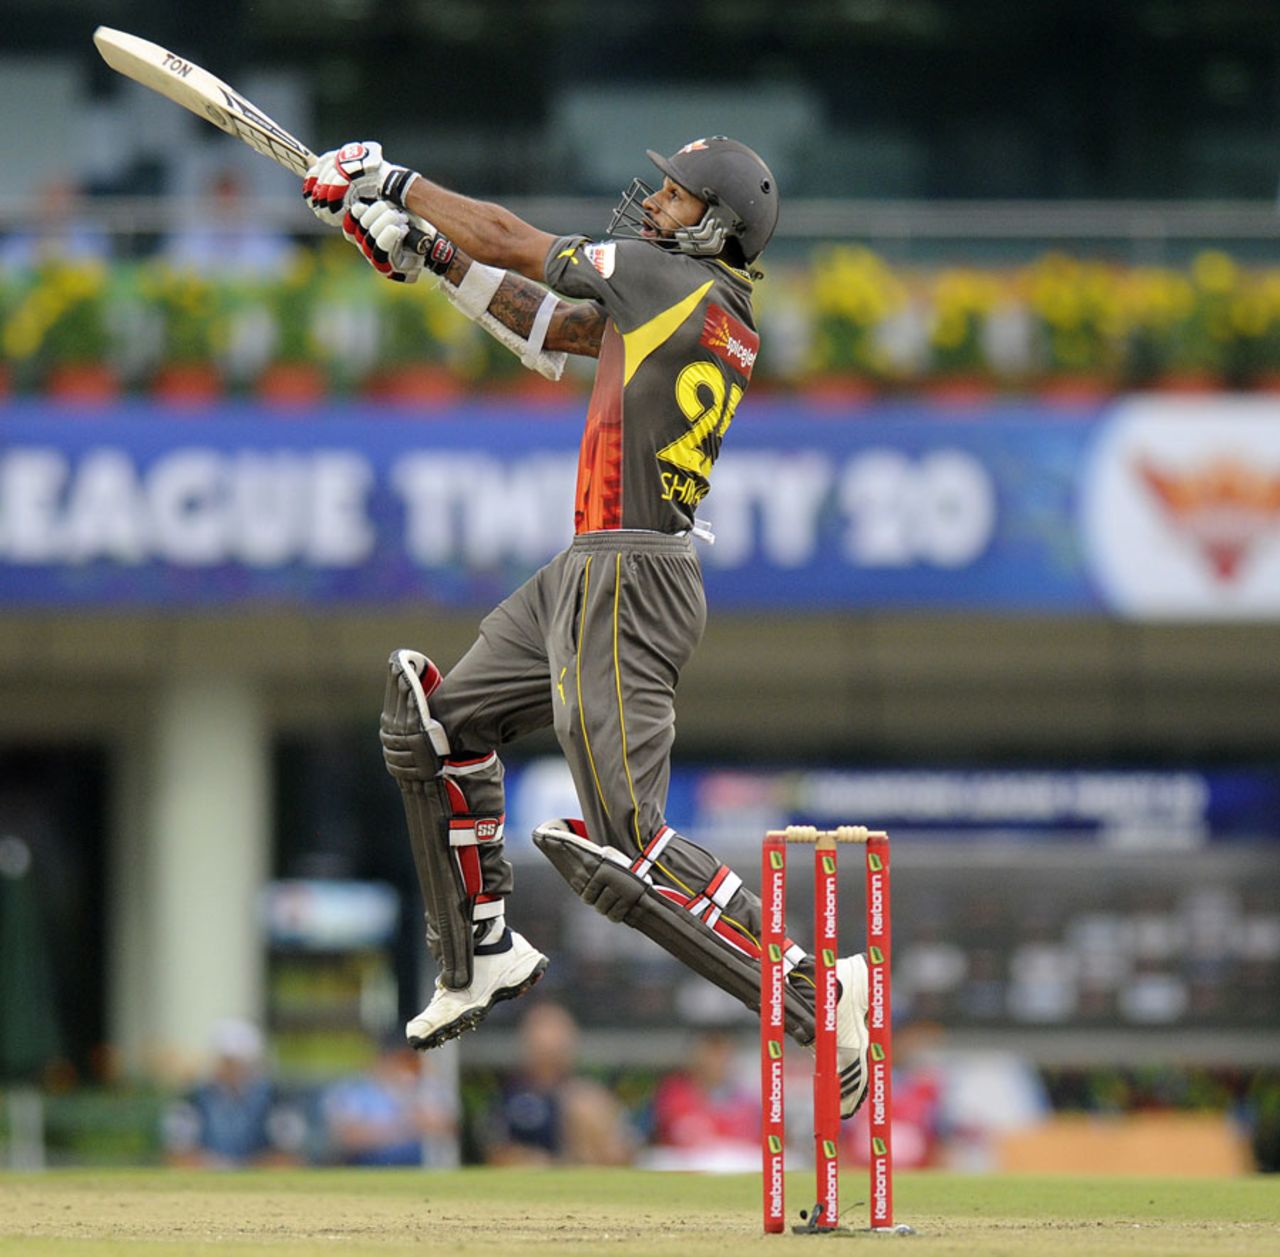 Shikhar Dhawan is airborne while attempting an off-side shot, Titans v Sunrisers Hyderabad, Champions League 2013, Group B, Ranchi, September 28, 2013